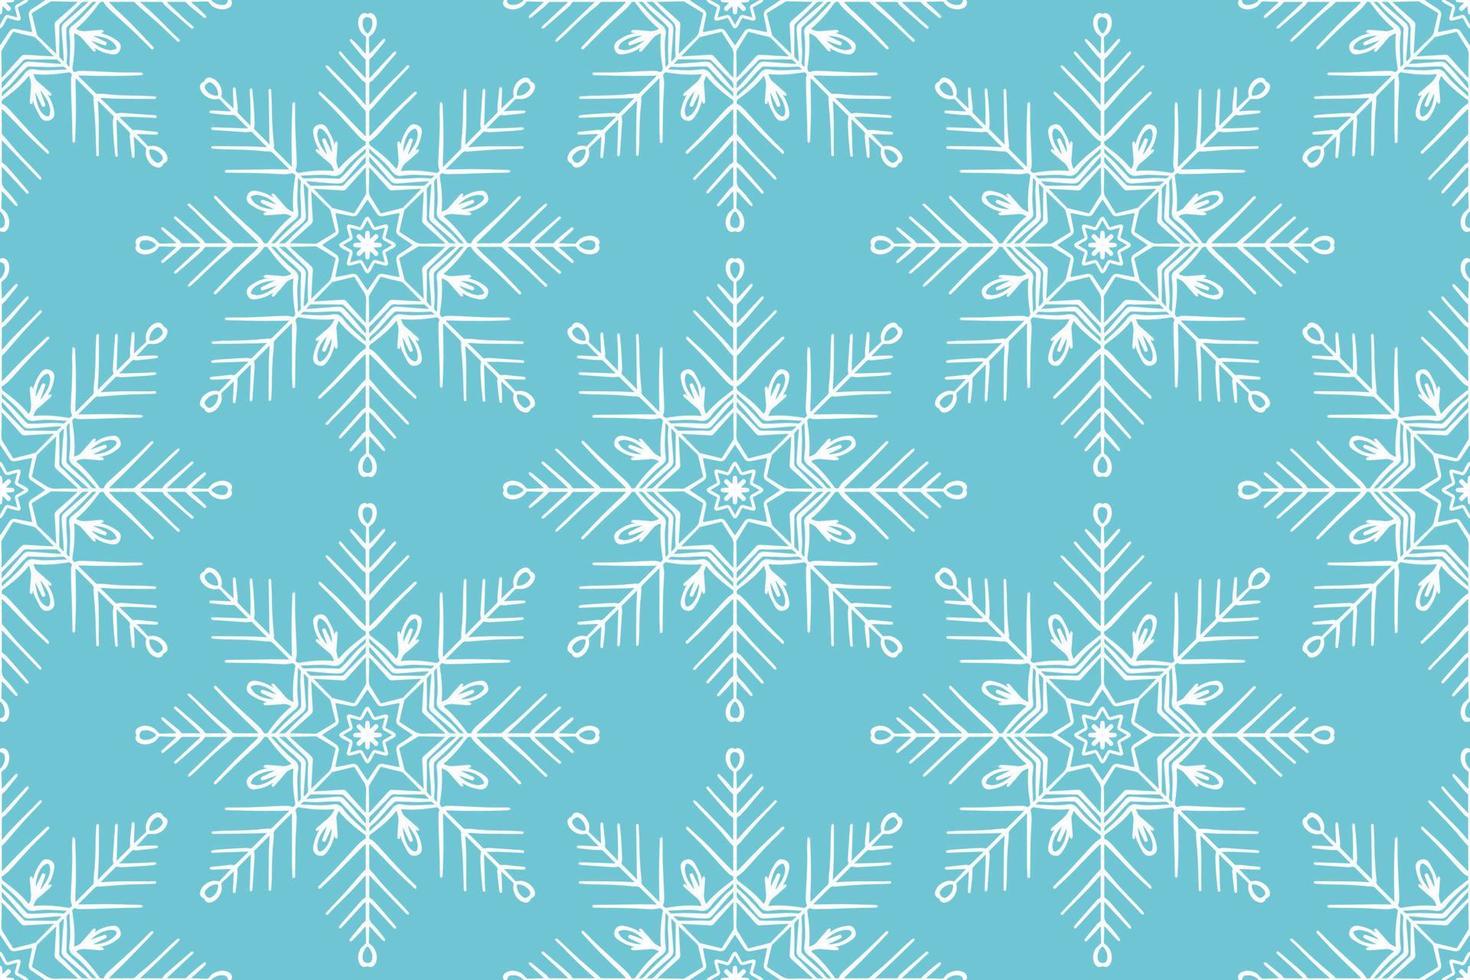 Cute winter season seamless pattern background with snowflake icon on bright blue. Geometric ornament print, Christmas, New Year textile design vector